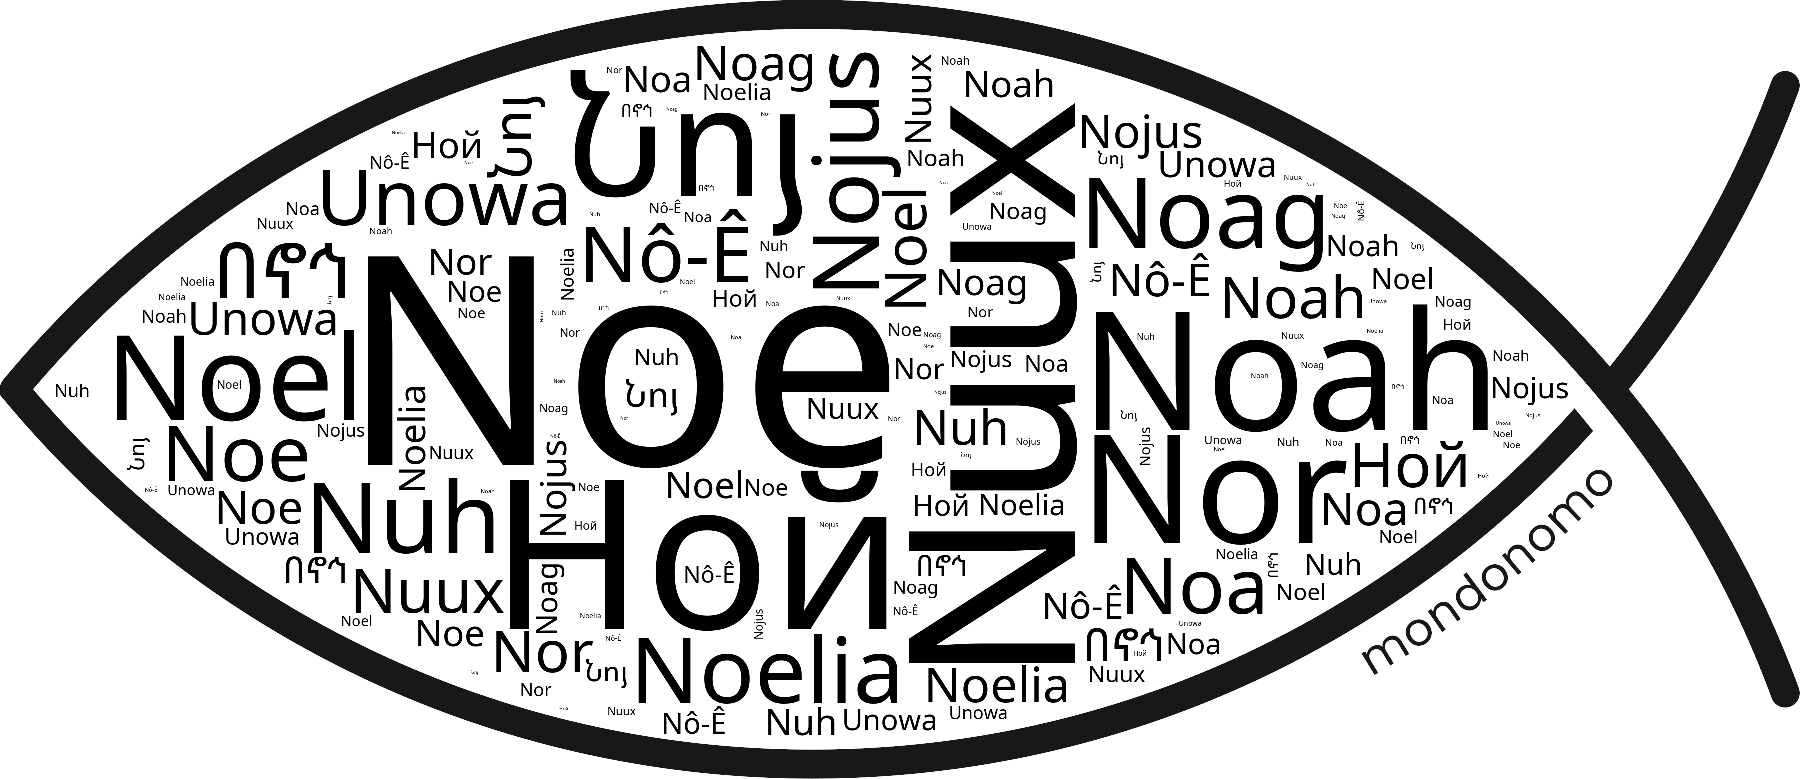 Name Noe in the world's Bibles